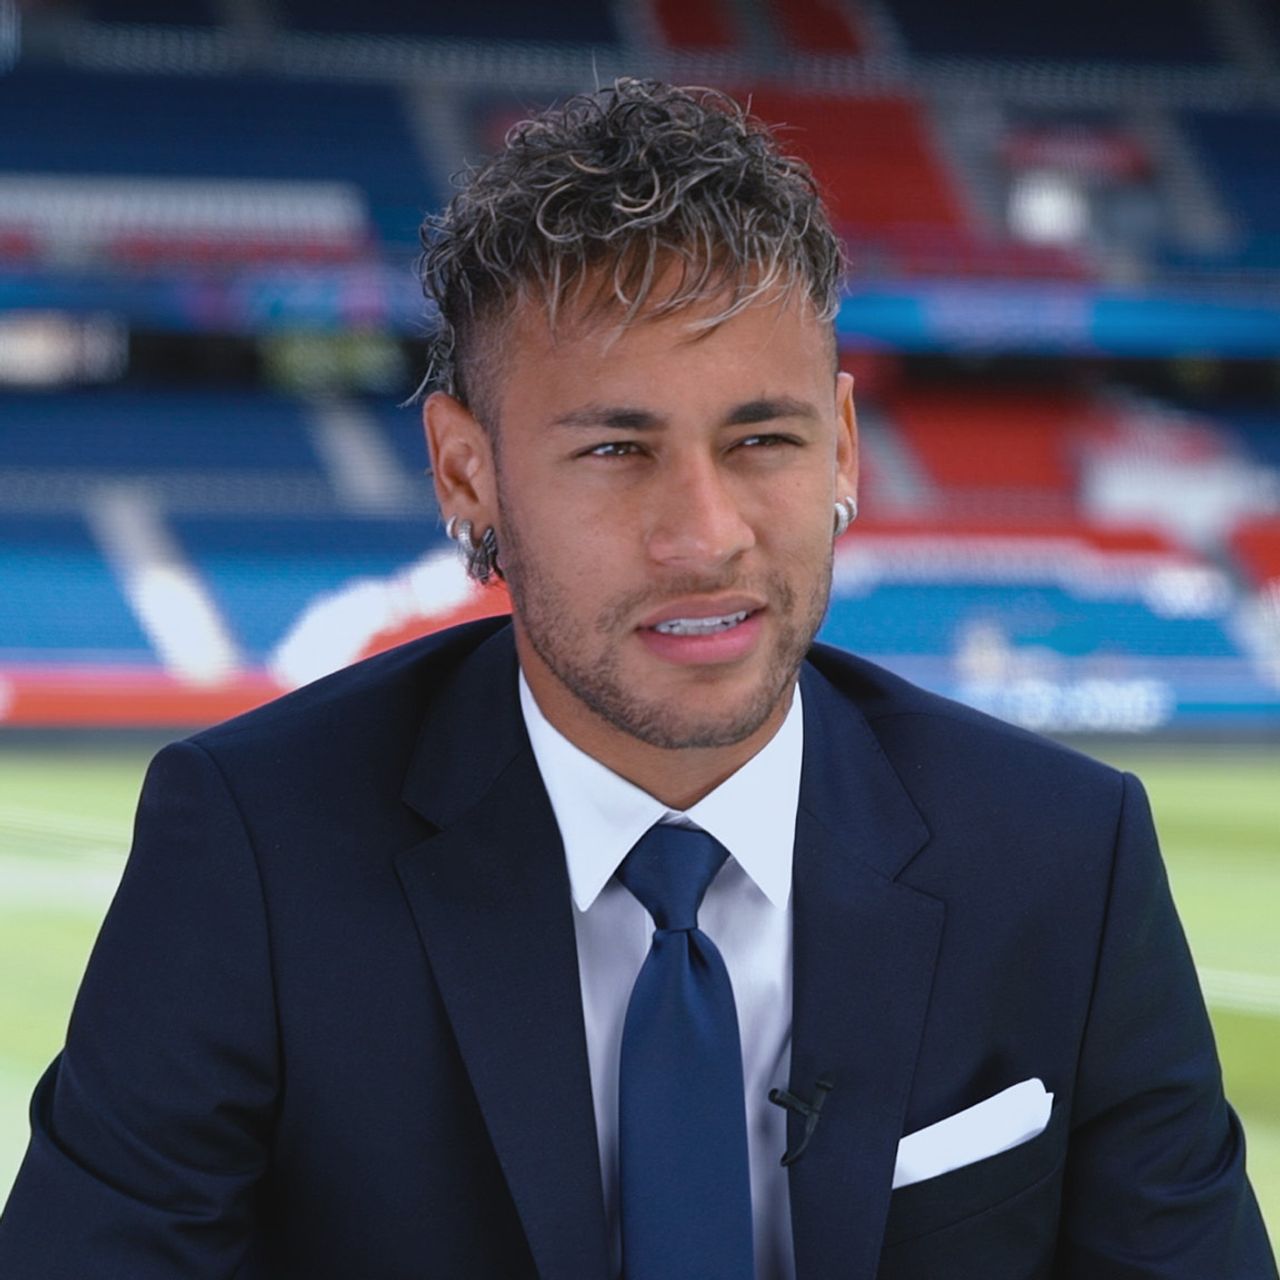 Neymar Jr Biography, Profile, Career, Achievements and Family